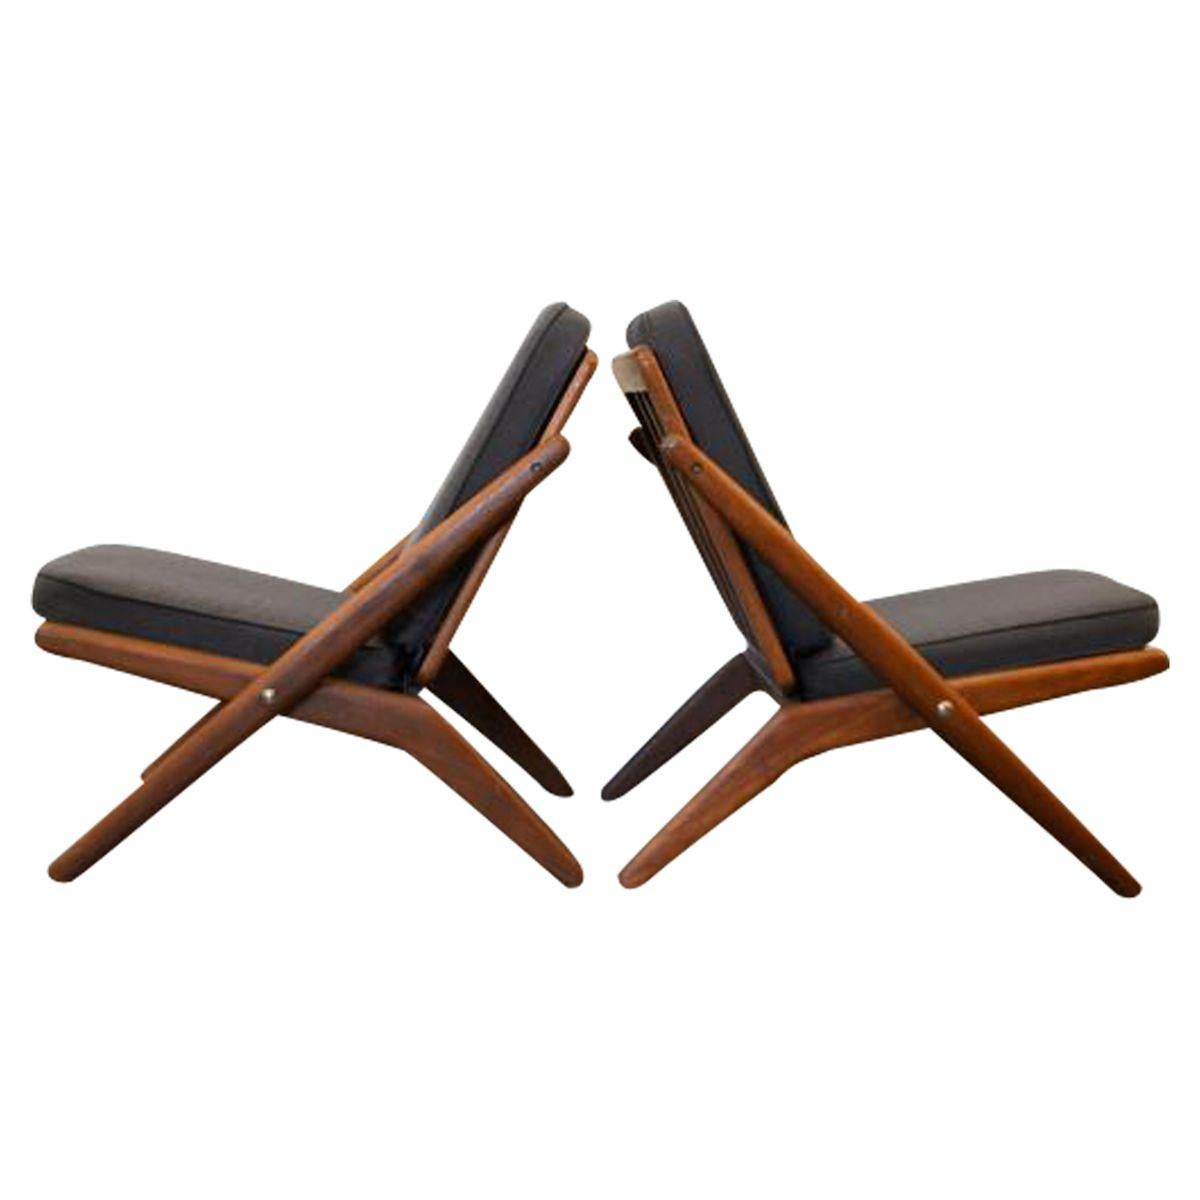 Set of two rare vintage Danish design “scissor” chairs designed by Arne Hovmand Olsen for Danish manufacturer Jutex. These Mid-Century Modern scissor chair comfortably combines unique aesthetics to make a dramatic statement in any space. The unique